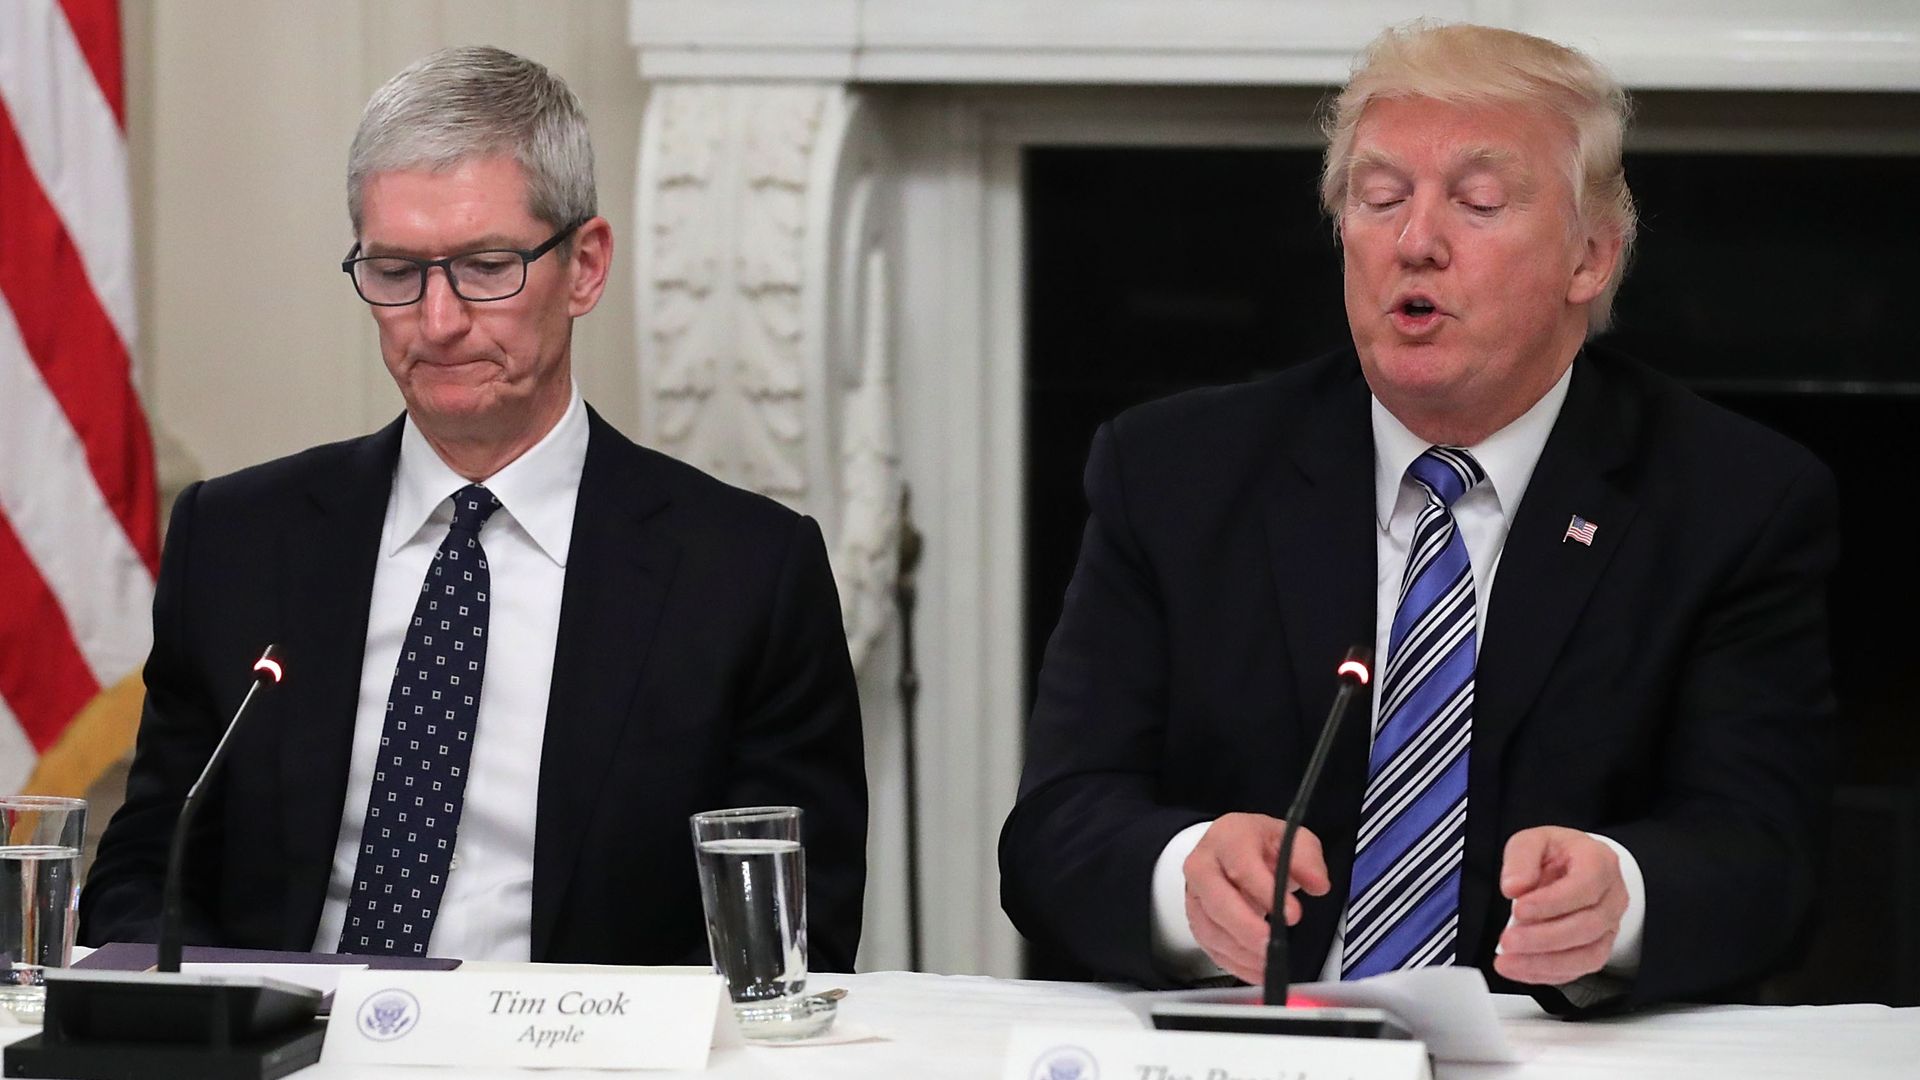 In this image, Tim Cook and Trump sit next to each other at a long table in the White House, both wearing suits.